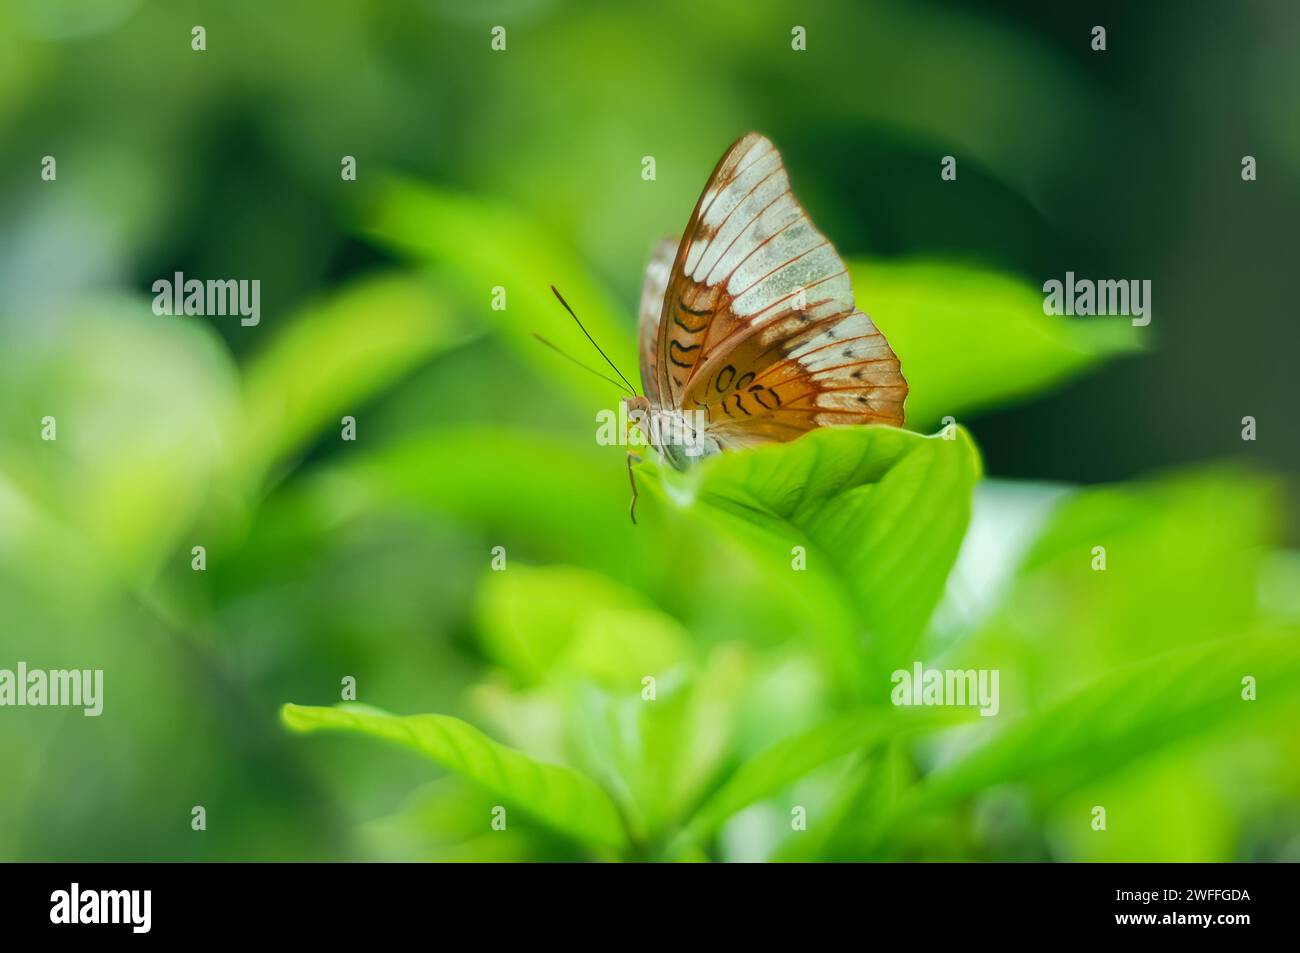 Butterfly Euthalia aconthea are perched on branches with a blurred background Stock Photo